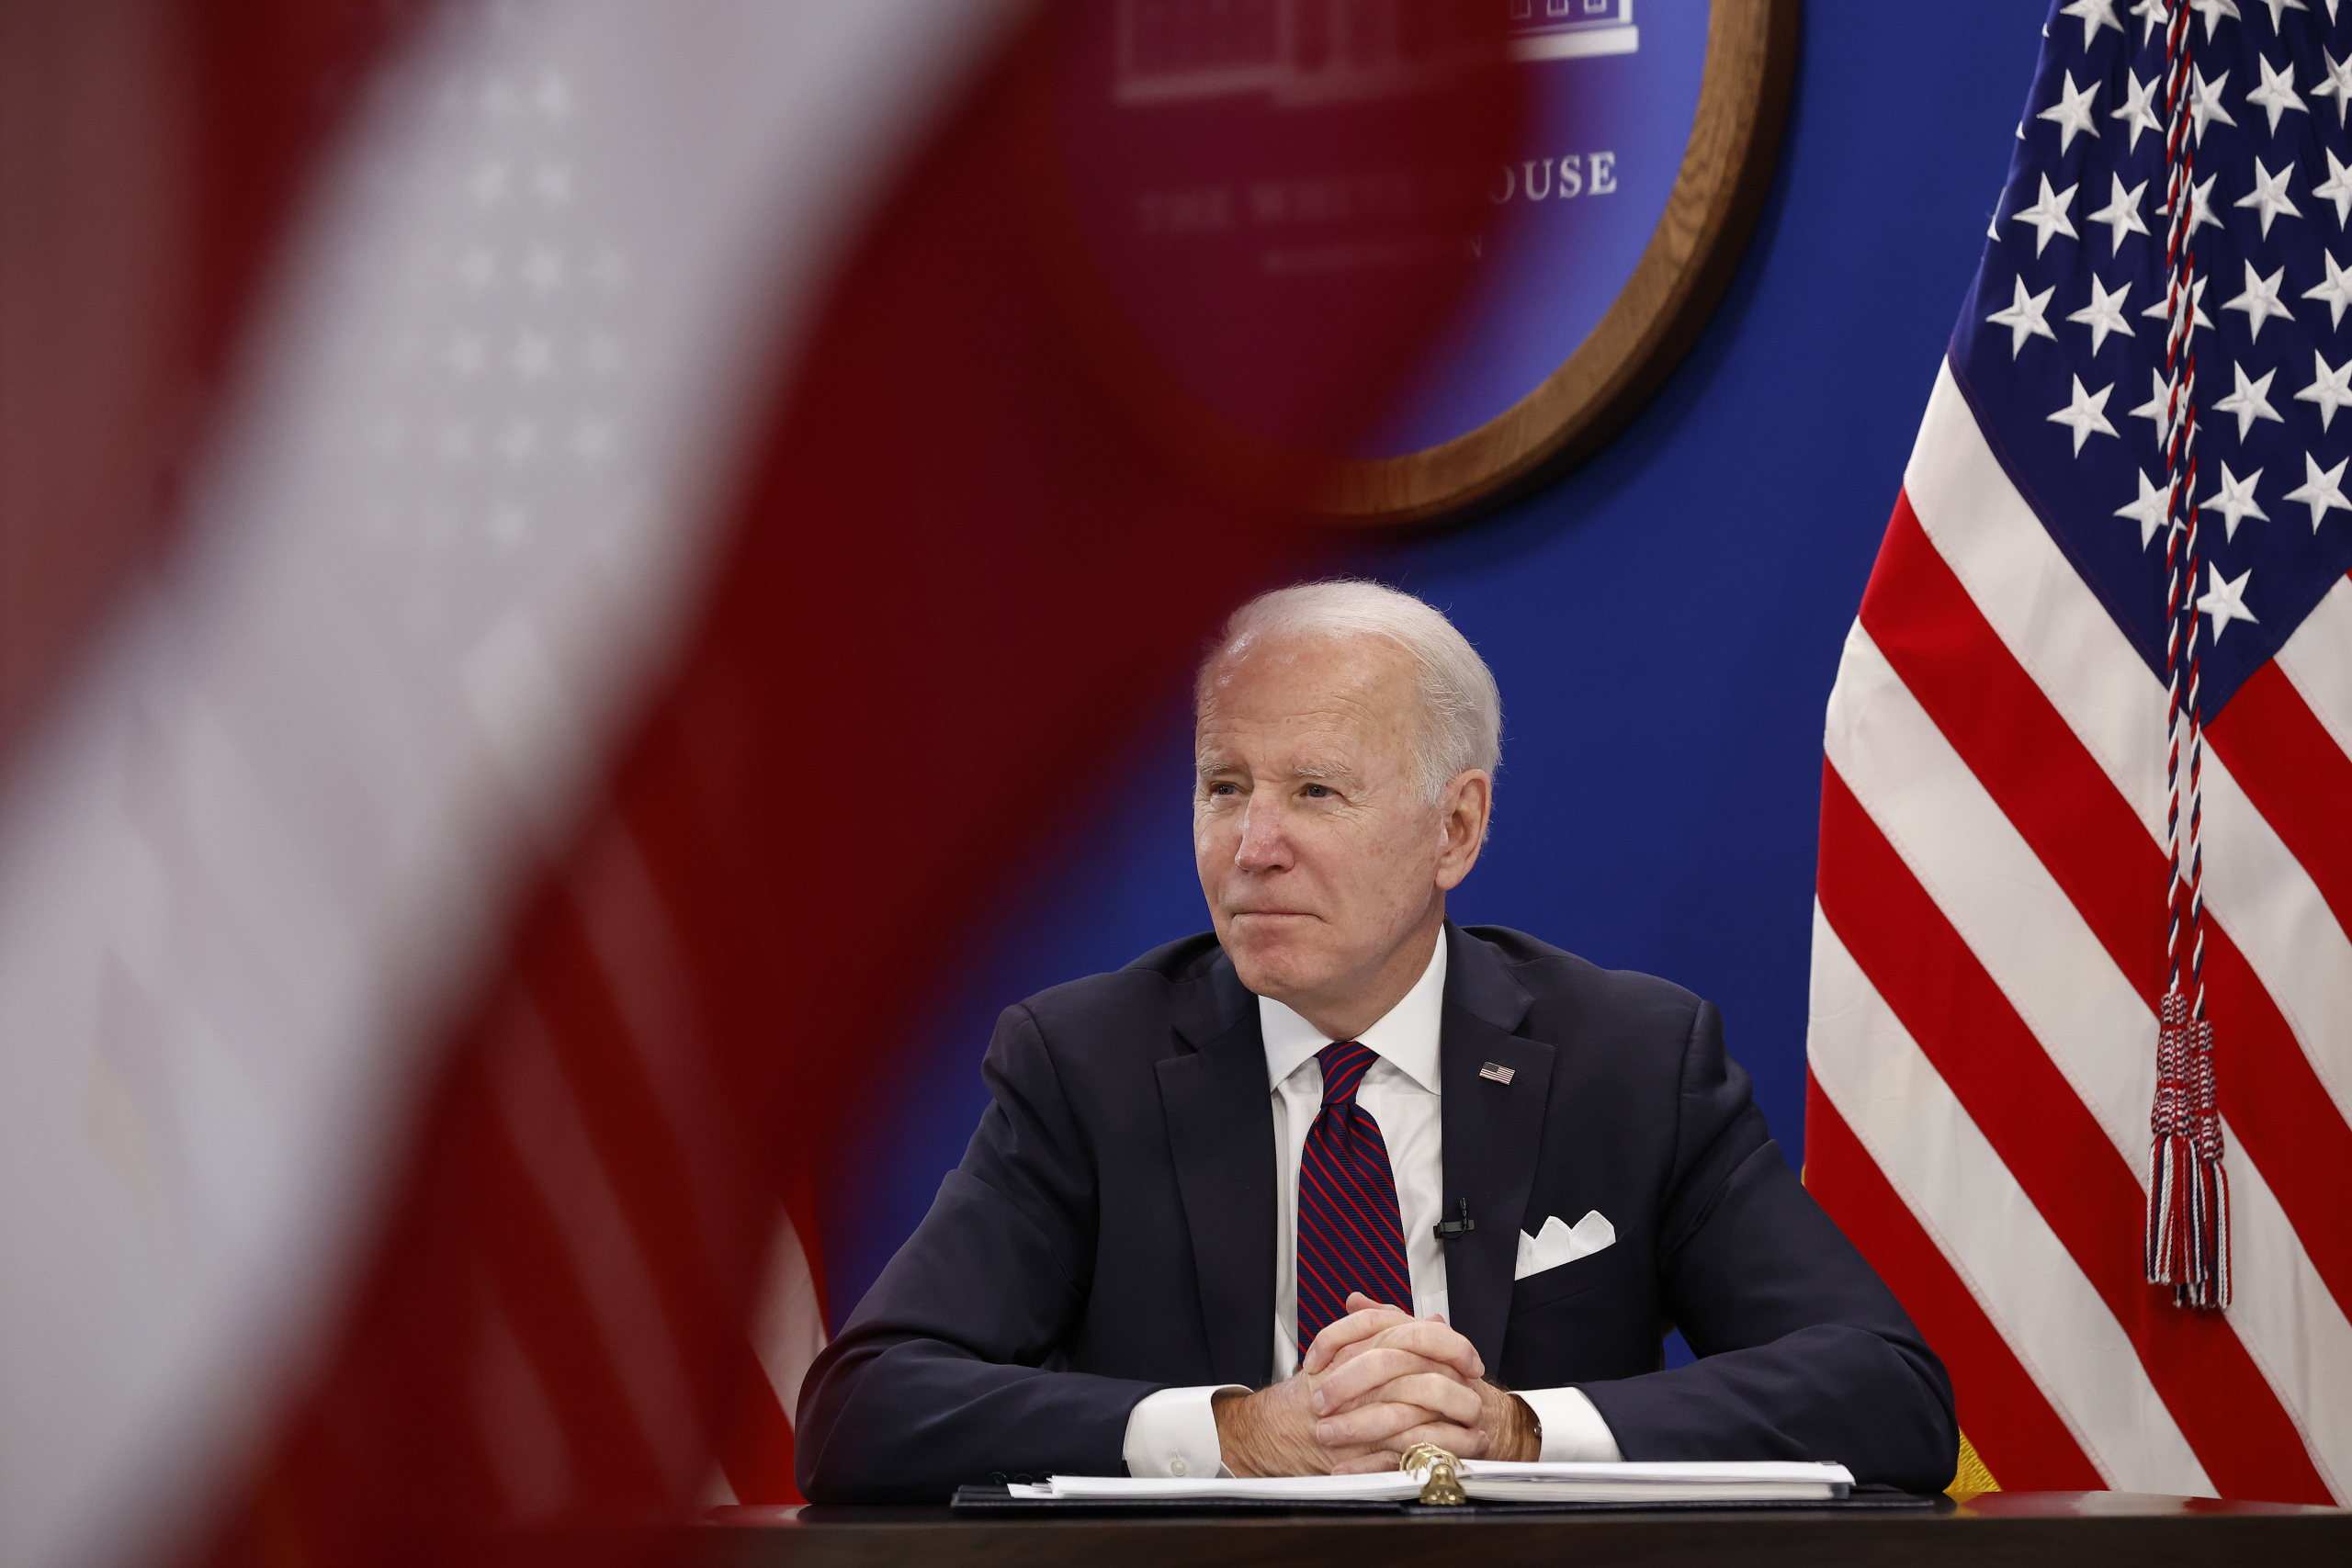 LN Radio 1.23.22 - Biden – Year One Weighed and Measured